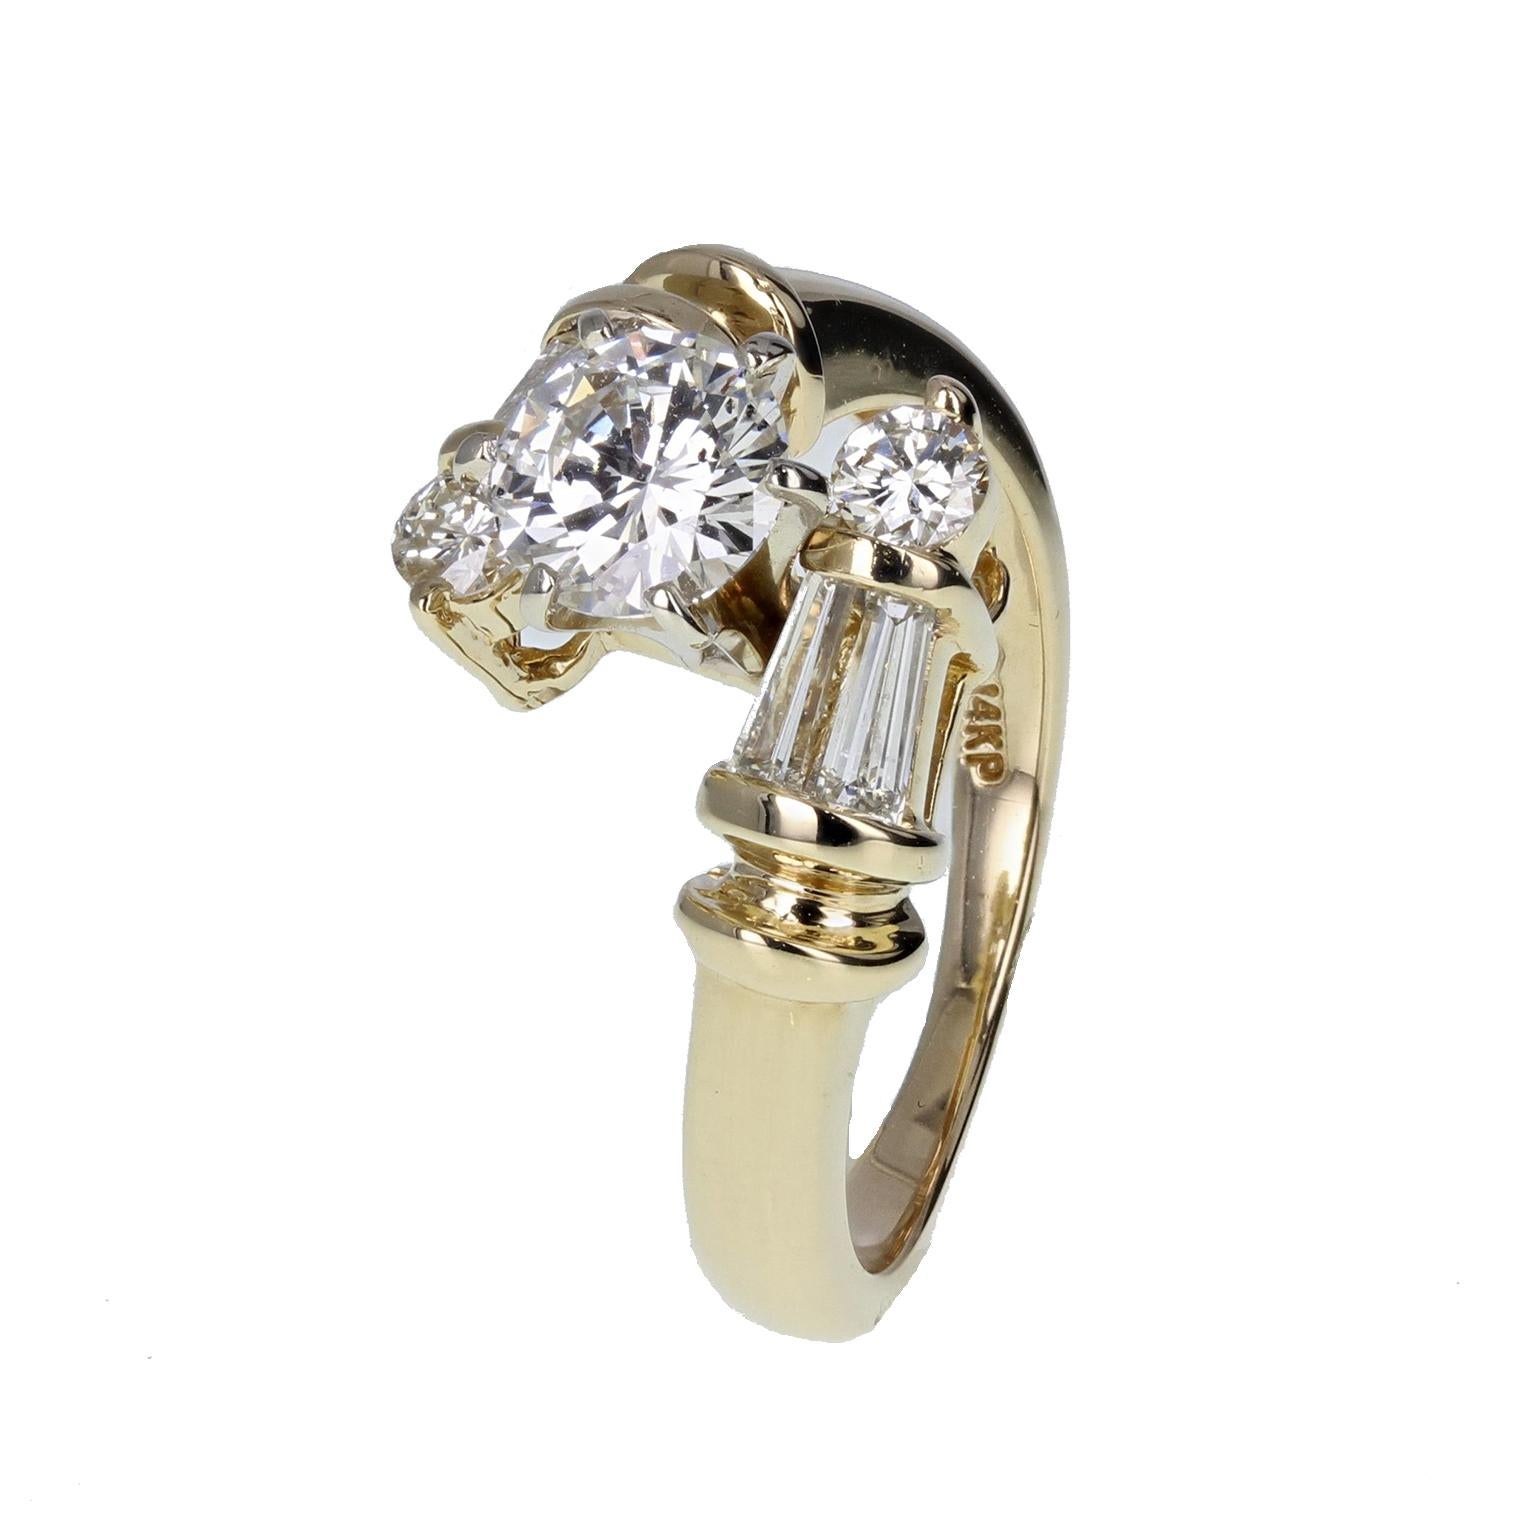  A stylish, sparkling diamond engagement ring. The central brilliant-cut diamond of approximately 0.90 carat, H colour, SI1 clarity, mounted in six 14-carat white gold claws. A fancy 'twist' styled 14-carat yellow gold shank, mounted with a single